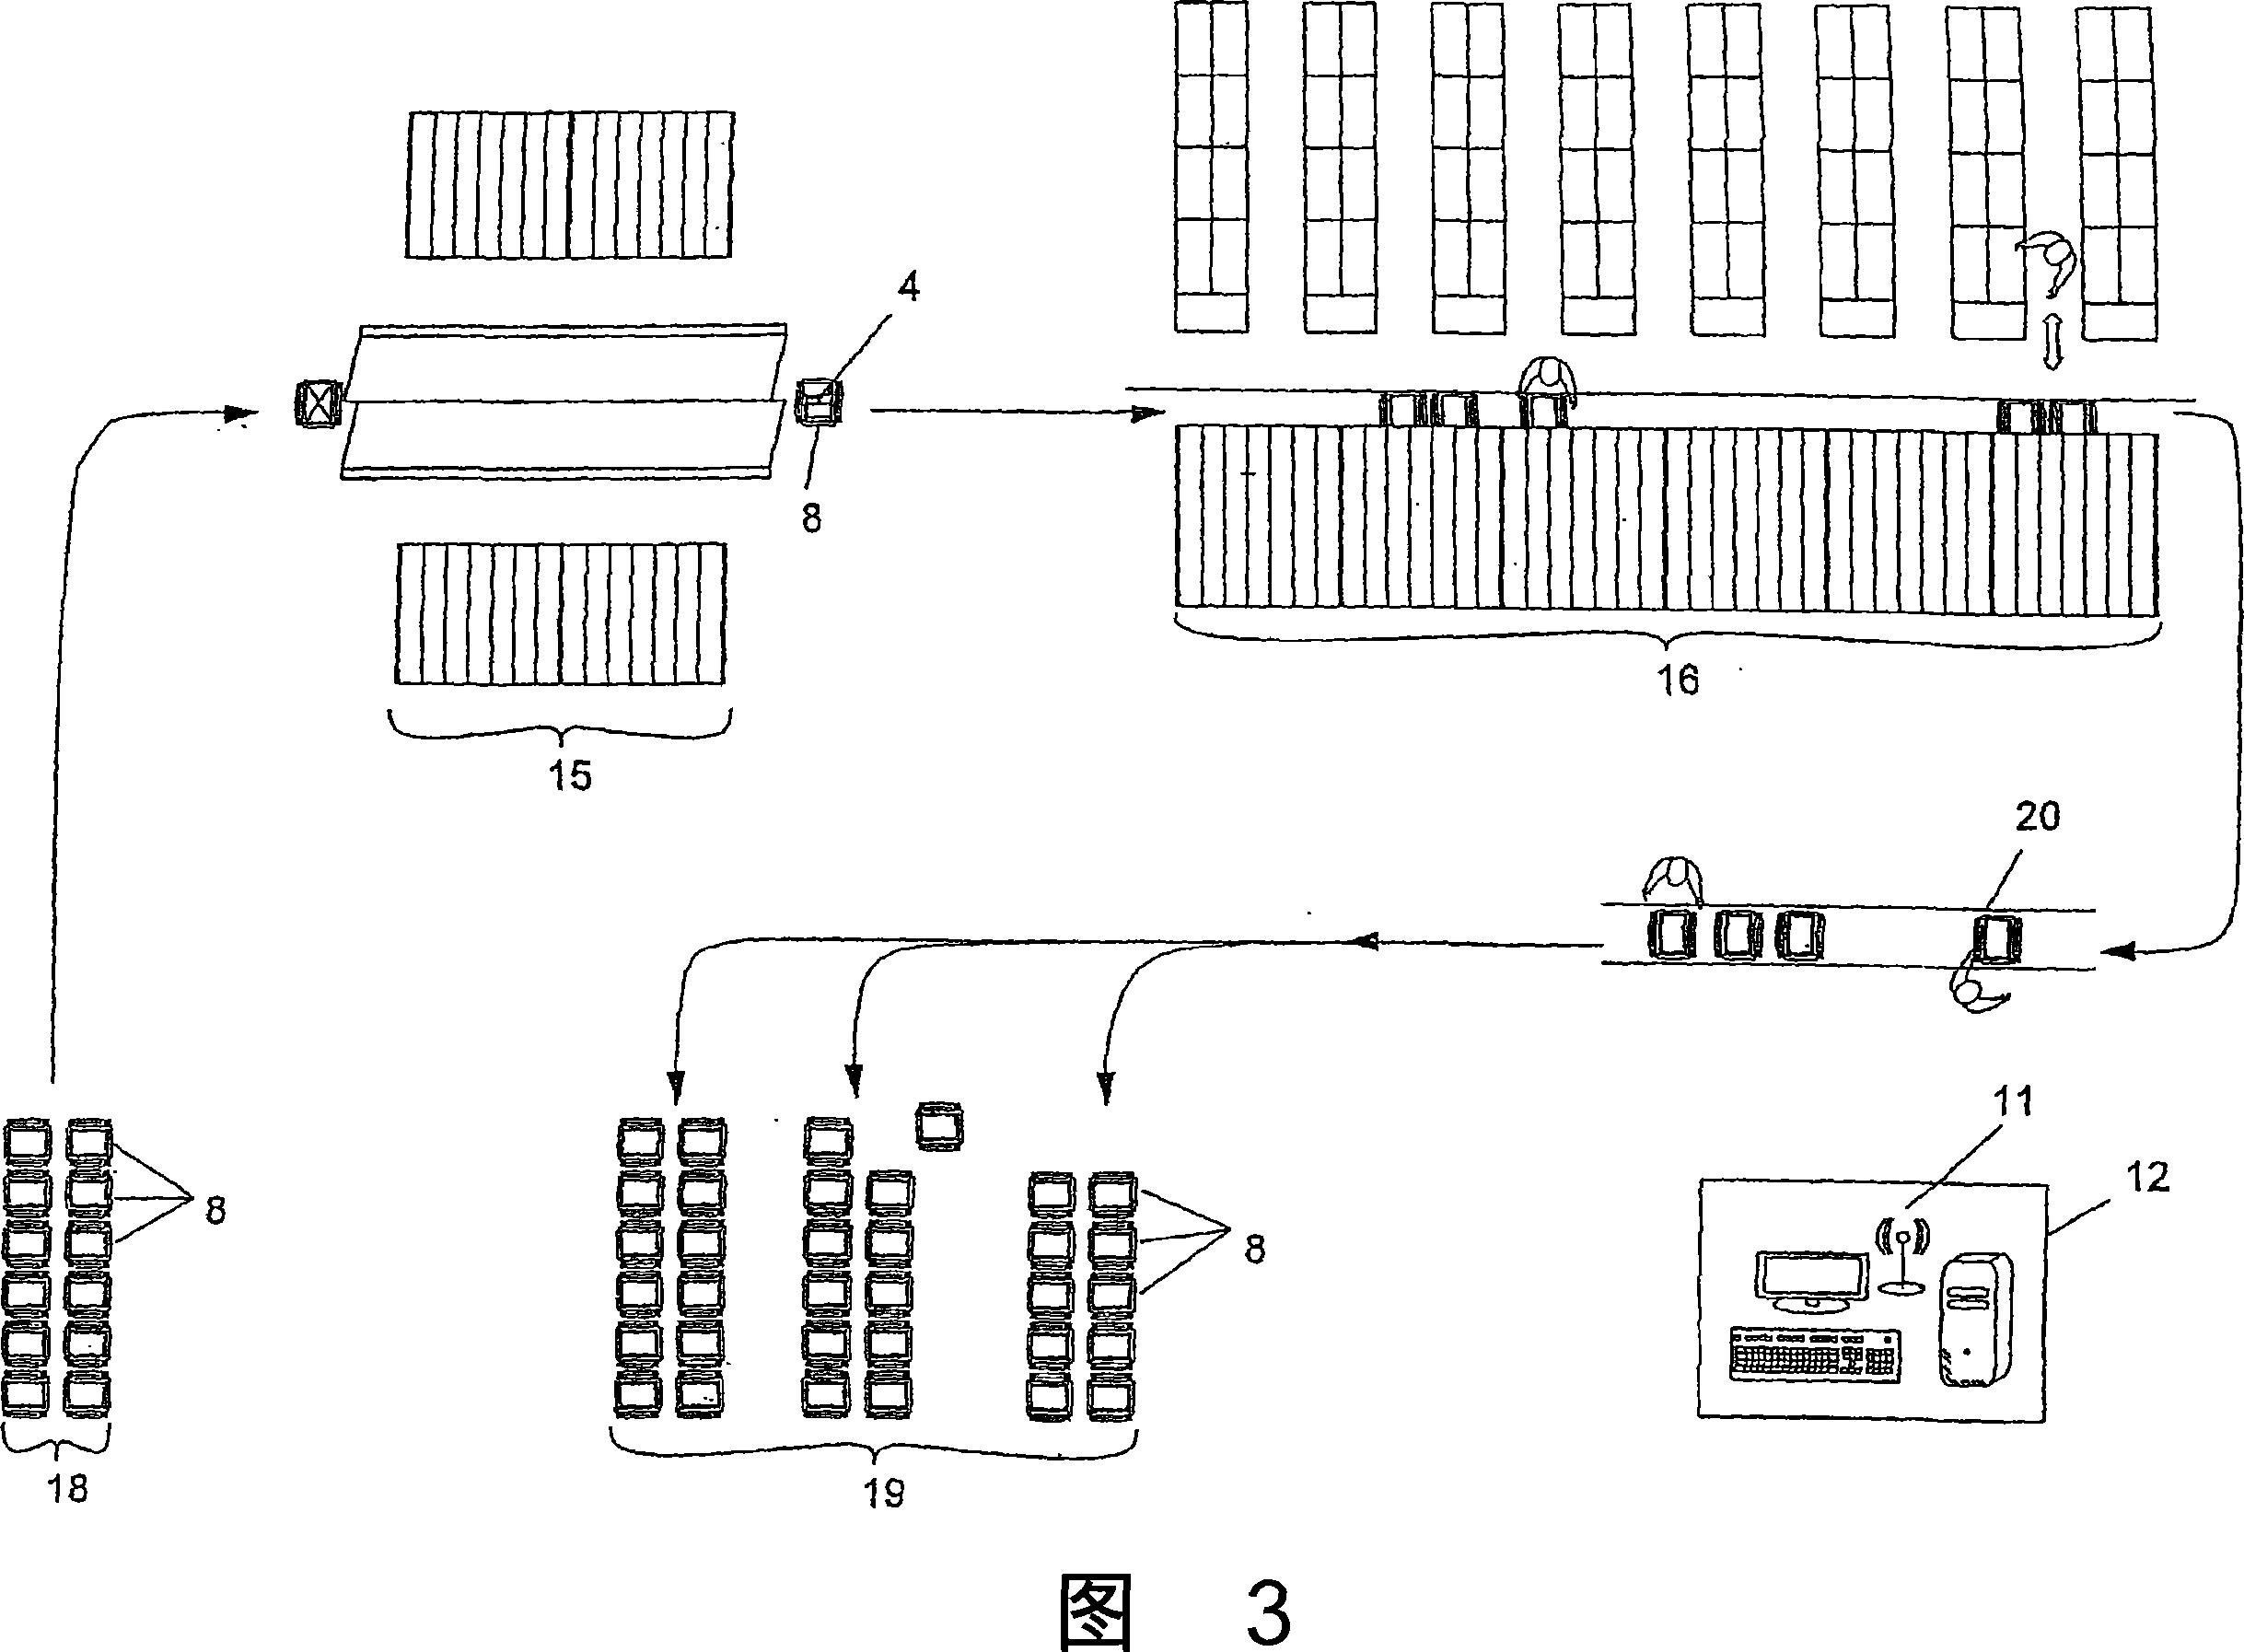 Method for transporting goods, and installation for carrying out said method